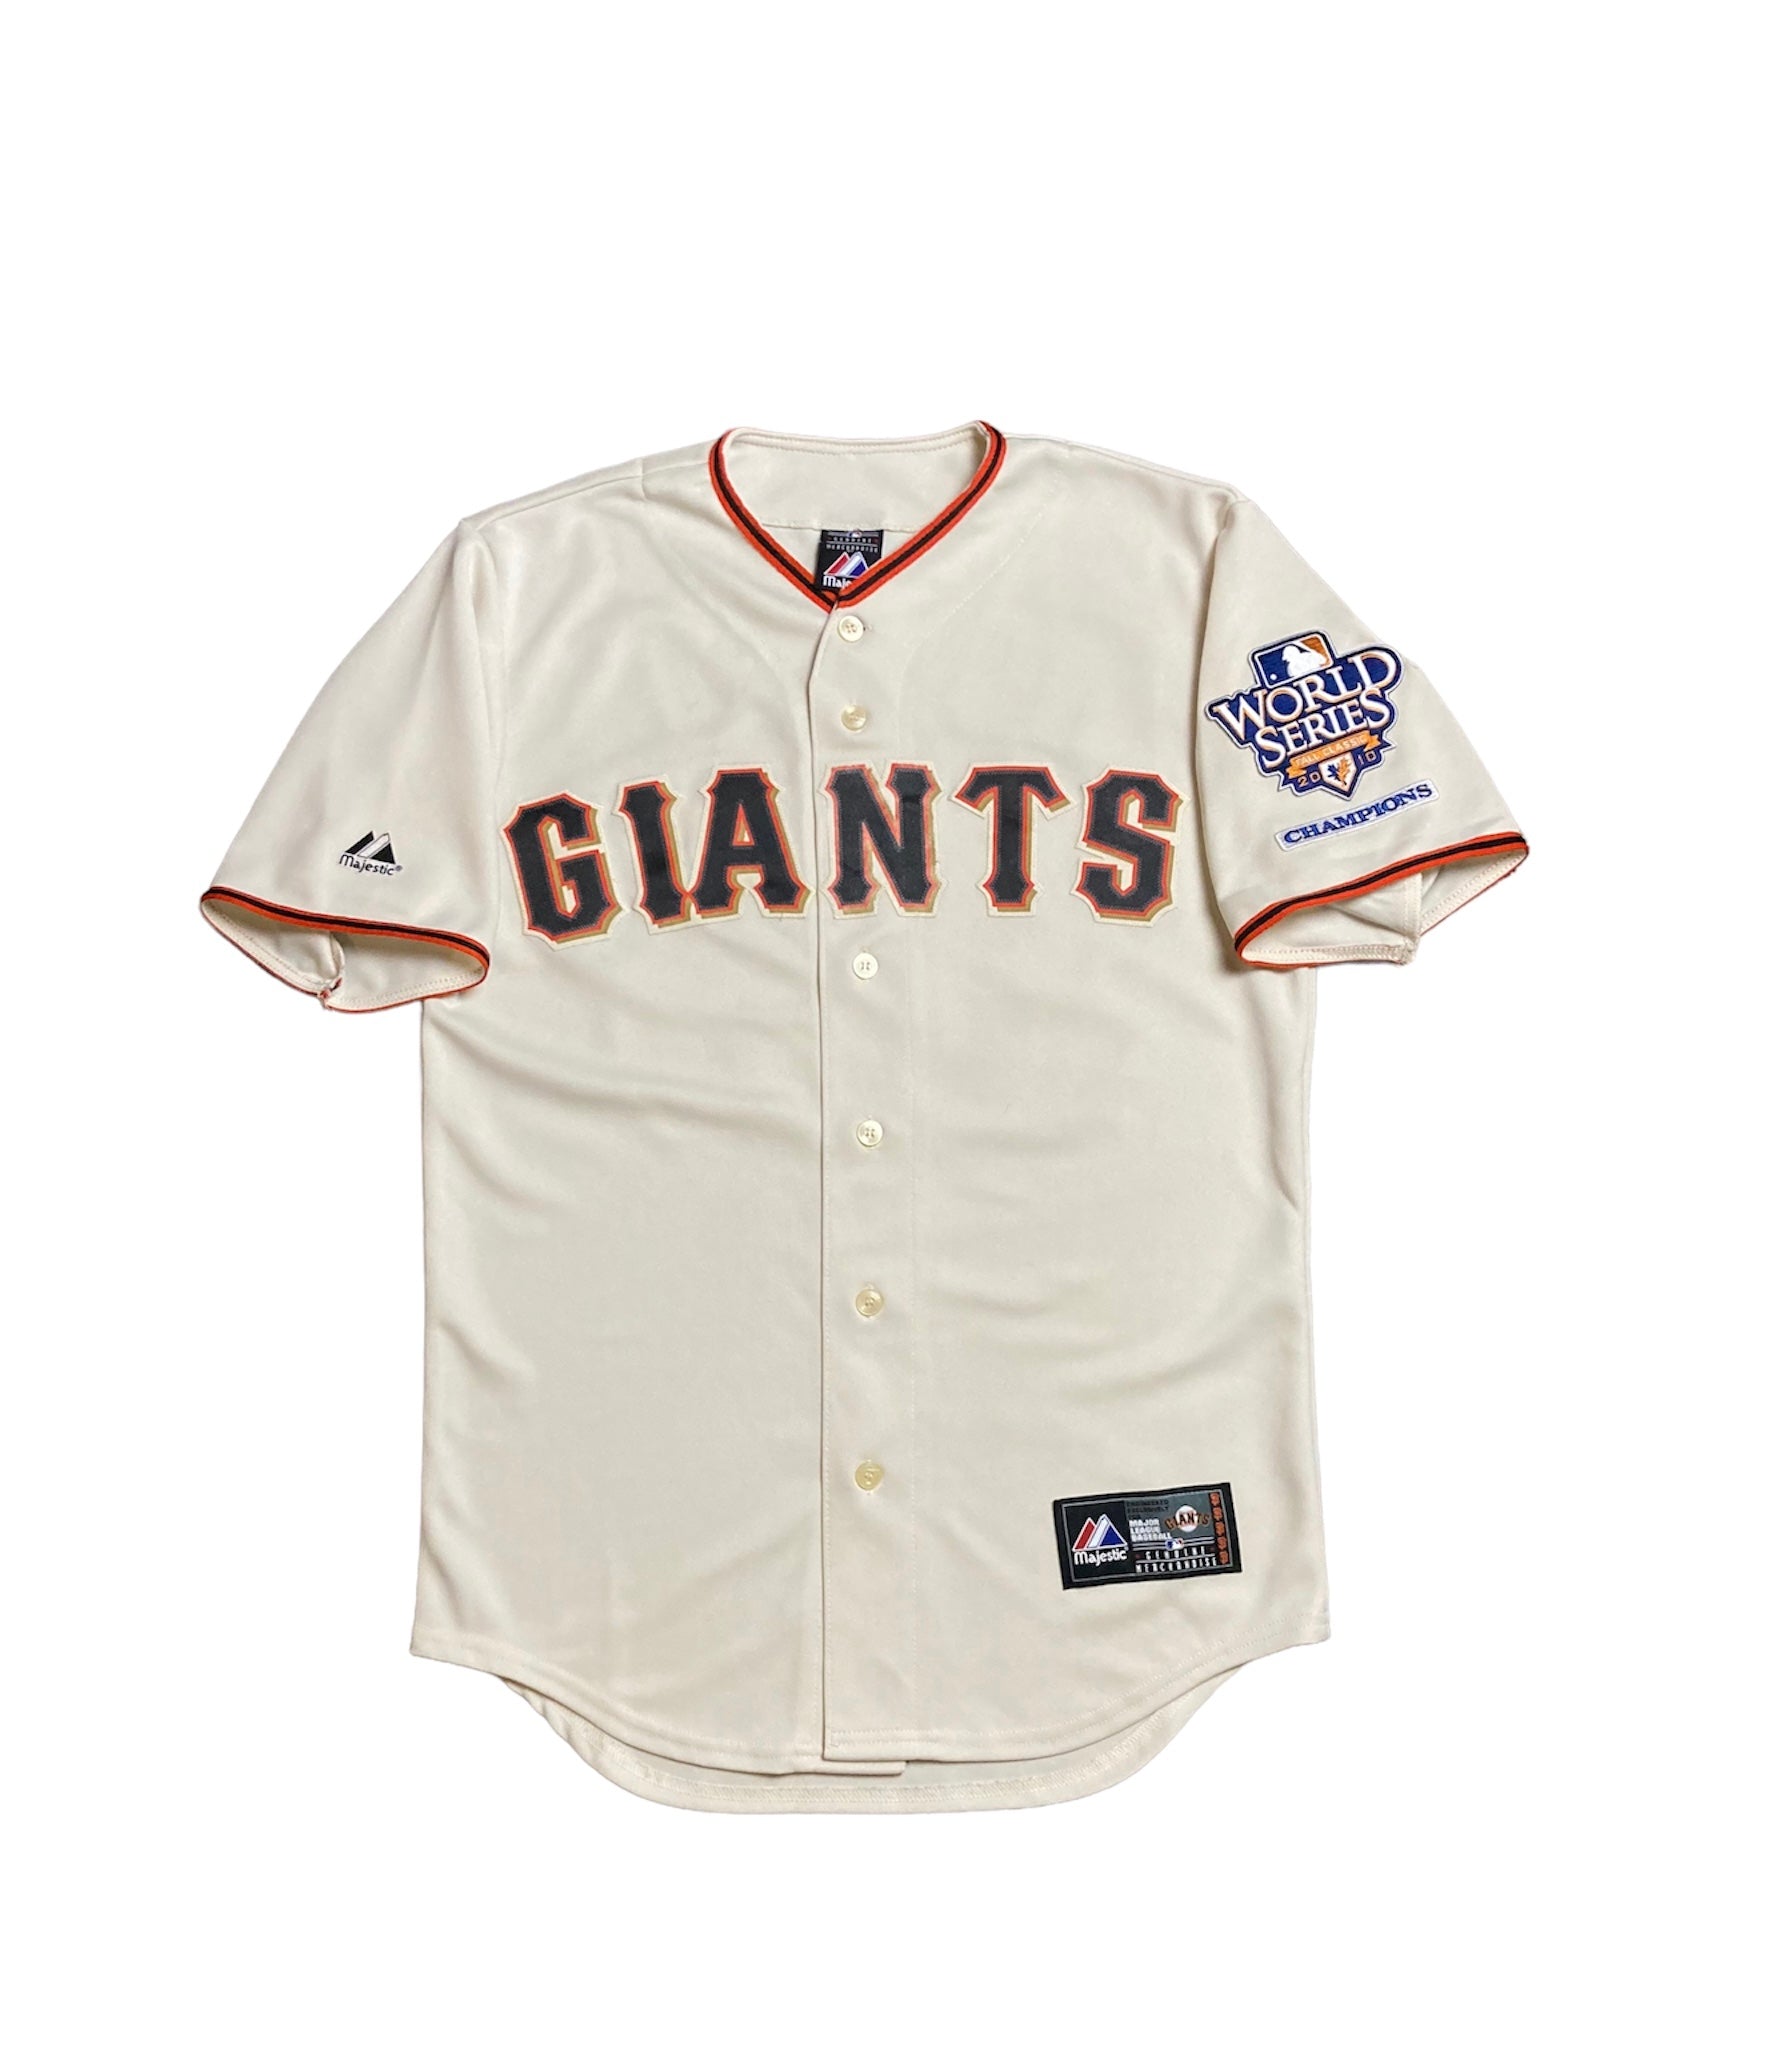 San Francisco Giants Tim Lincecum Game-Used 2014 World Series Road jersey  (size 42. authenticated 10/21 & 10/28)